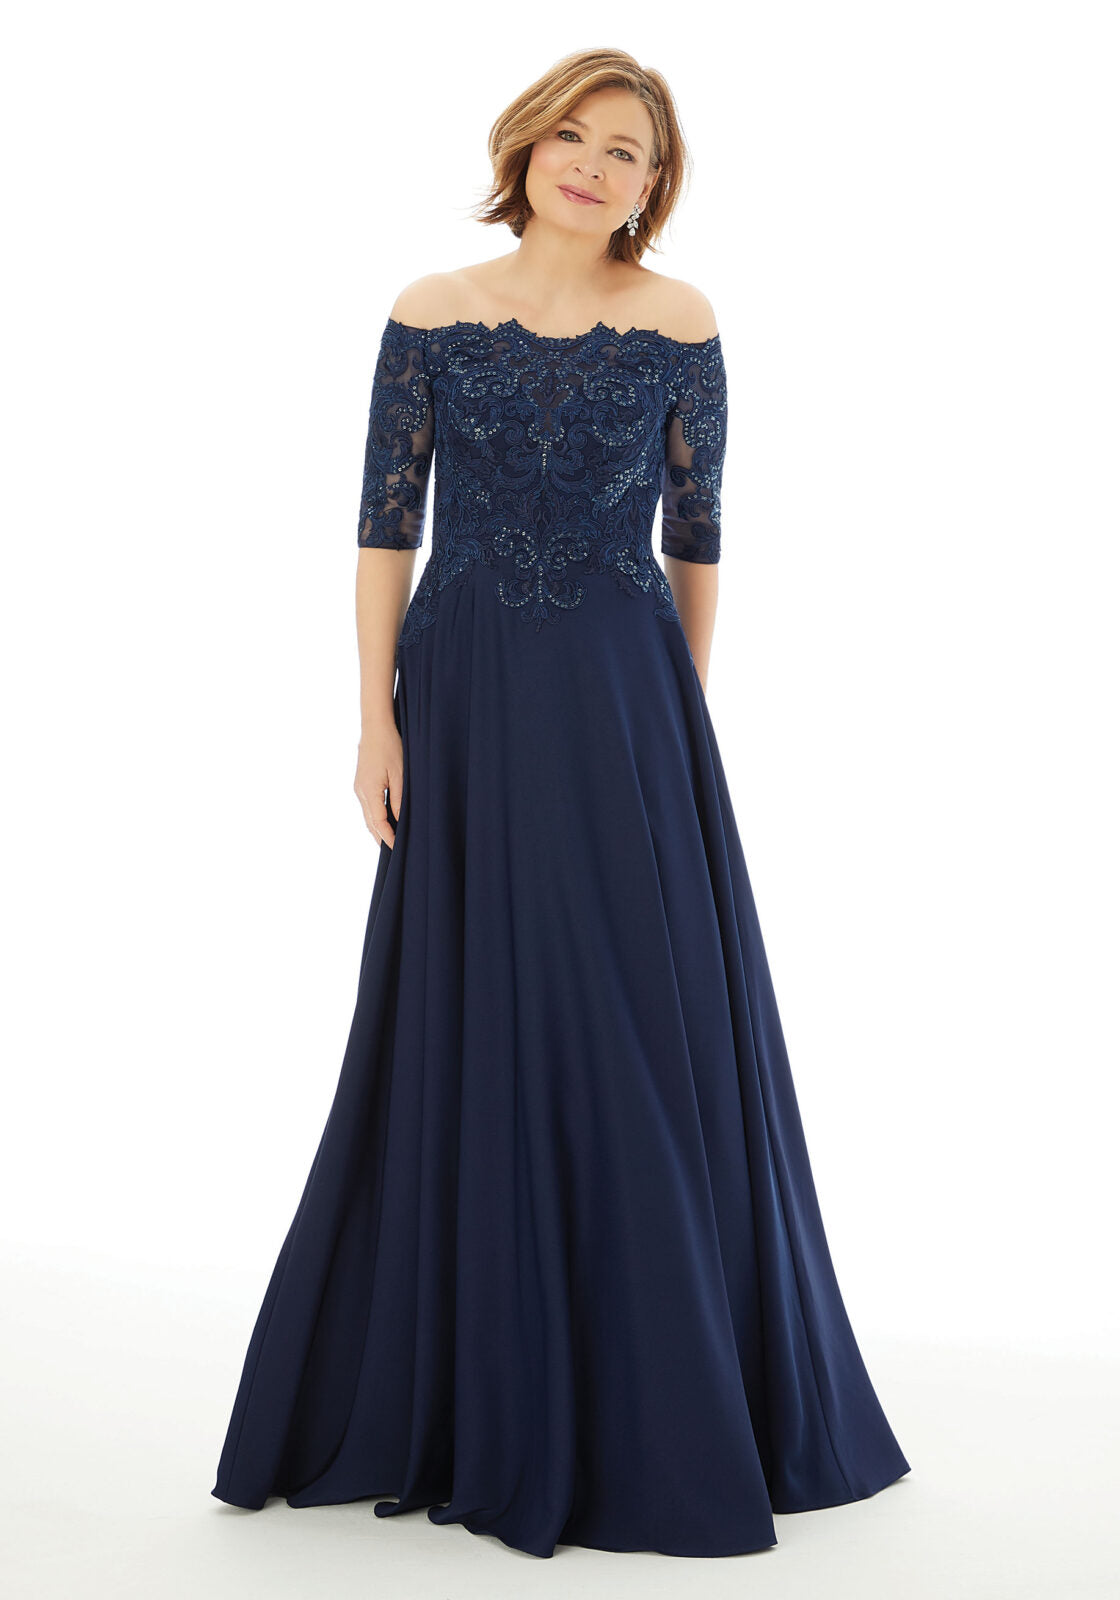 A-line Evening Gown With Beading And Appliqués On Crepe Morilee